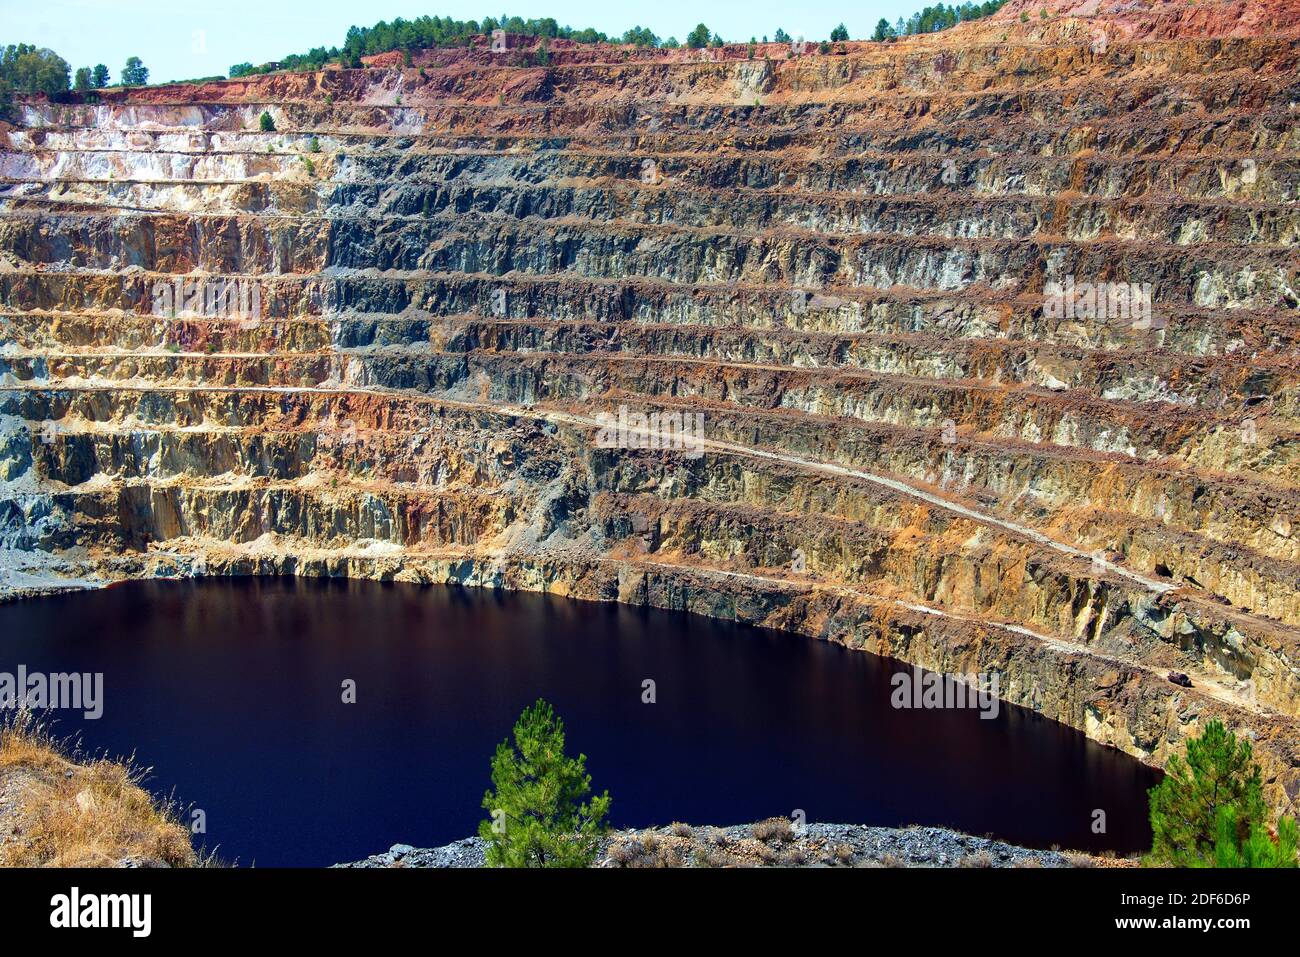 Riotinto mines. Corta Atalaya is a open-pit mine, surface mining technique of minerals extraction. Riotinto is a minerals deposit of chalcopyrite and Stock Photo